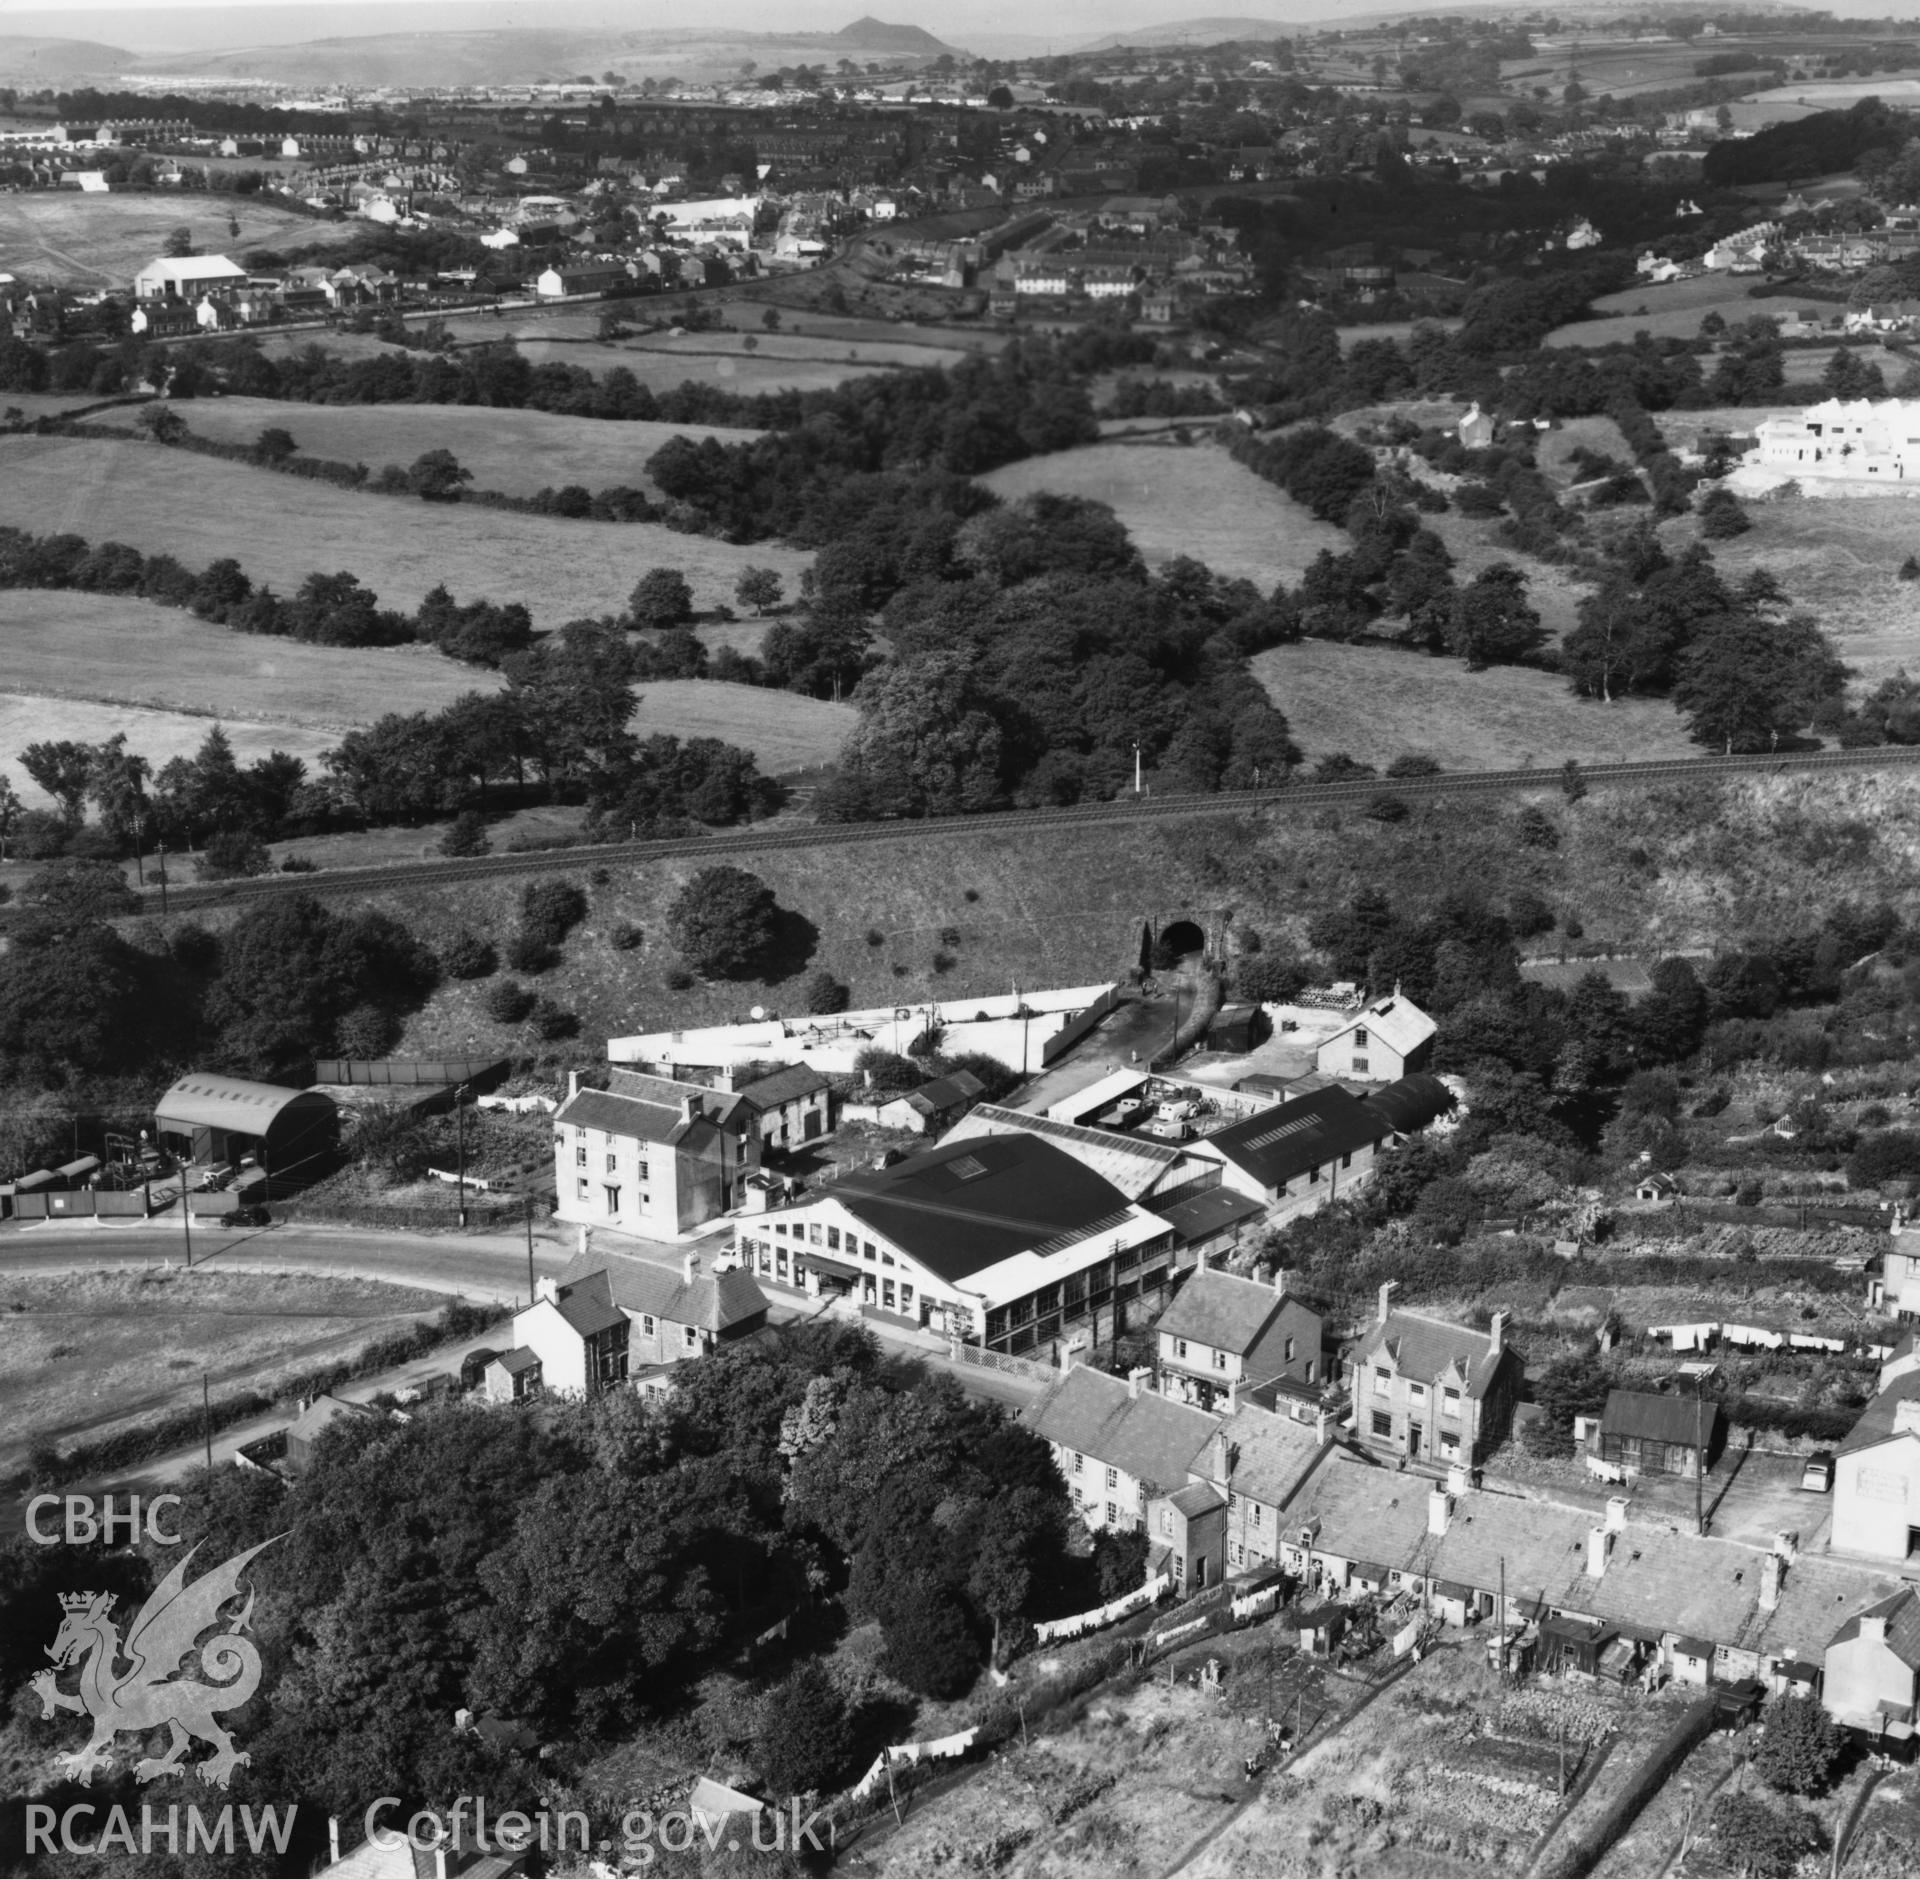 View of Gibbs Brothers garage at Pontllanfraith also showing people viewing aeroplane and washing drying in back gardens. Oblique aerial photograph, 5?" cut roll film.